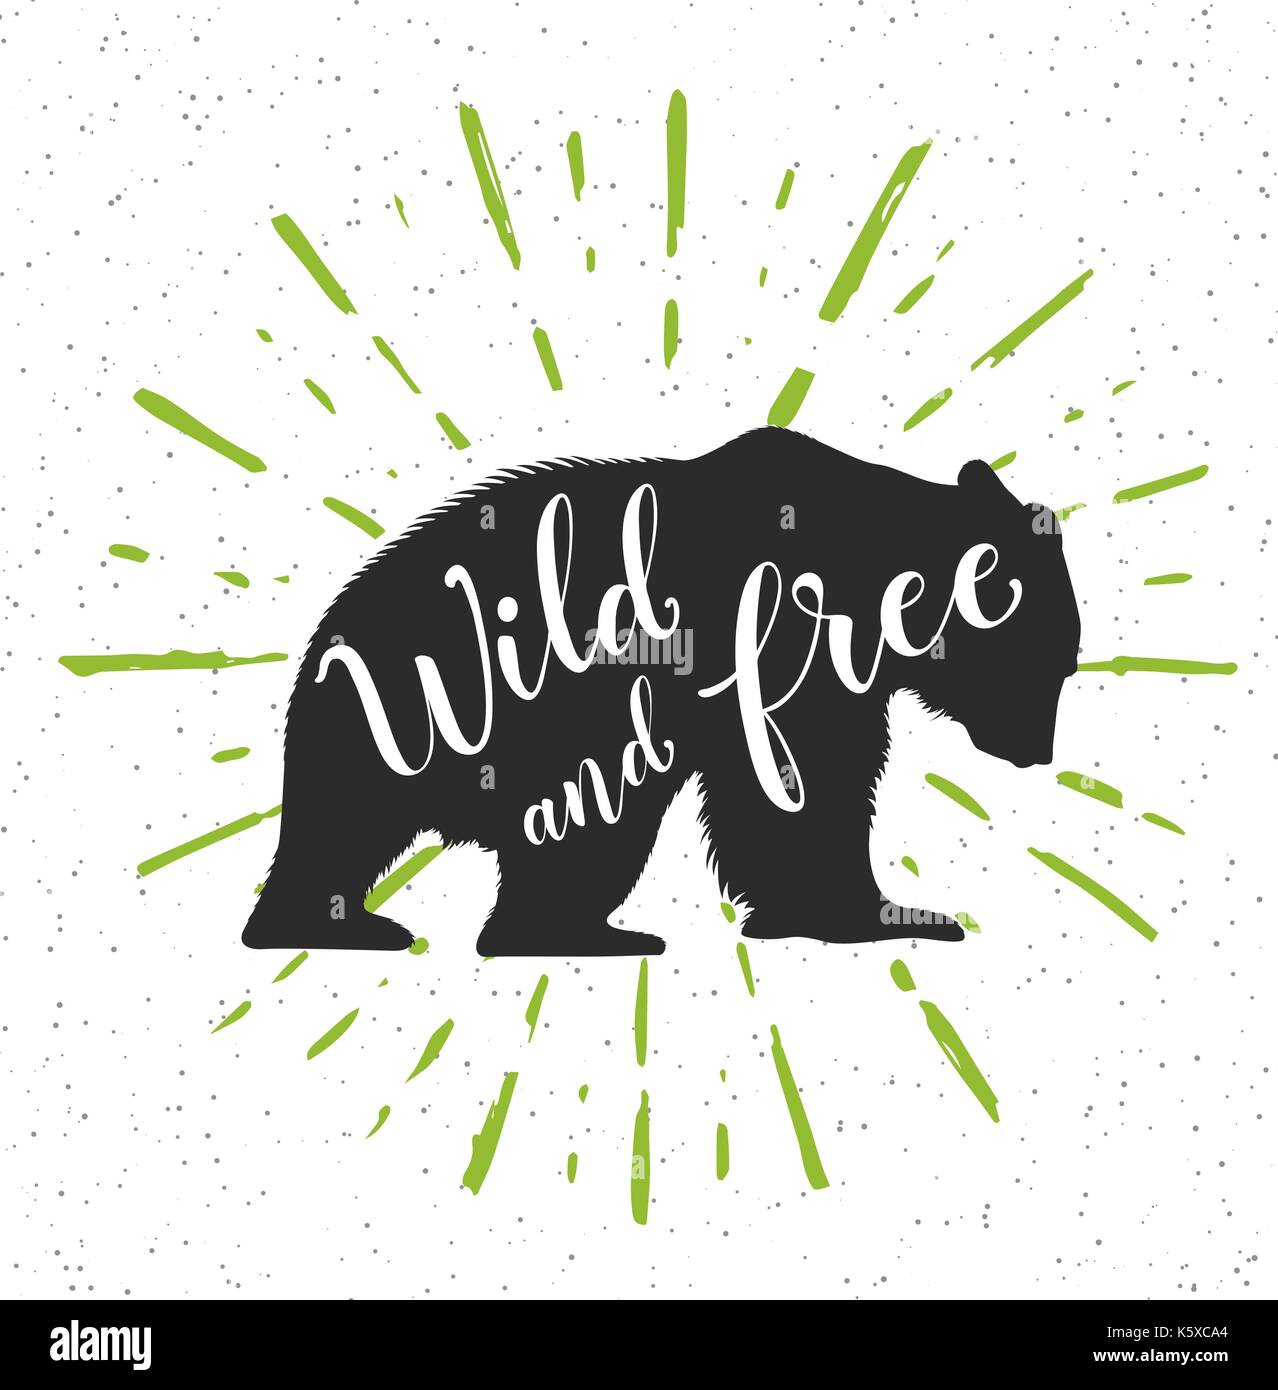 Silhouette of a wild bear and calligraphy. Wild and free lettering. Stock Vector